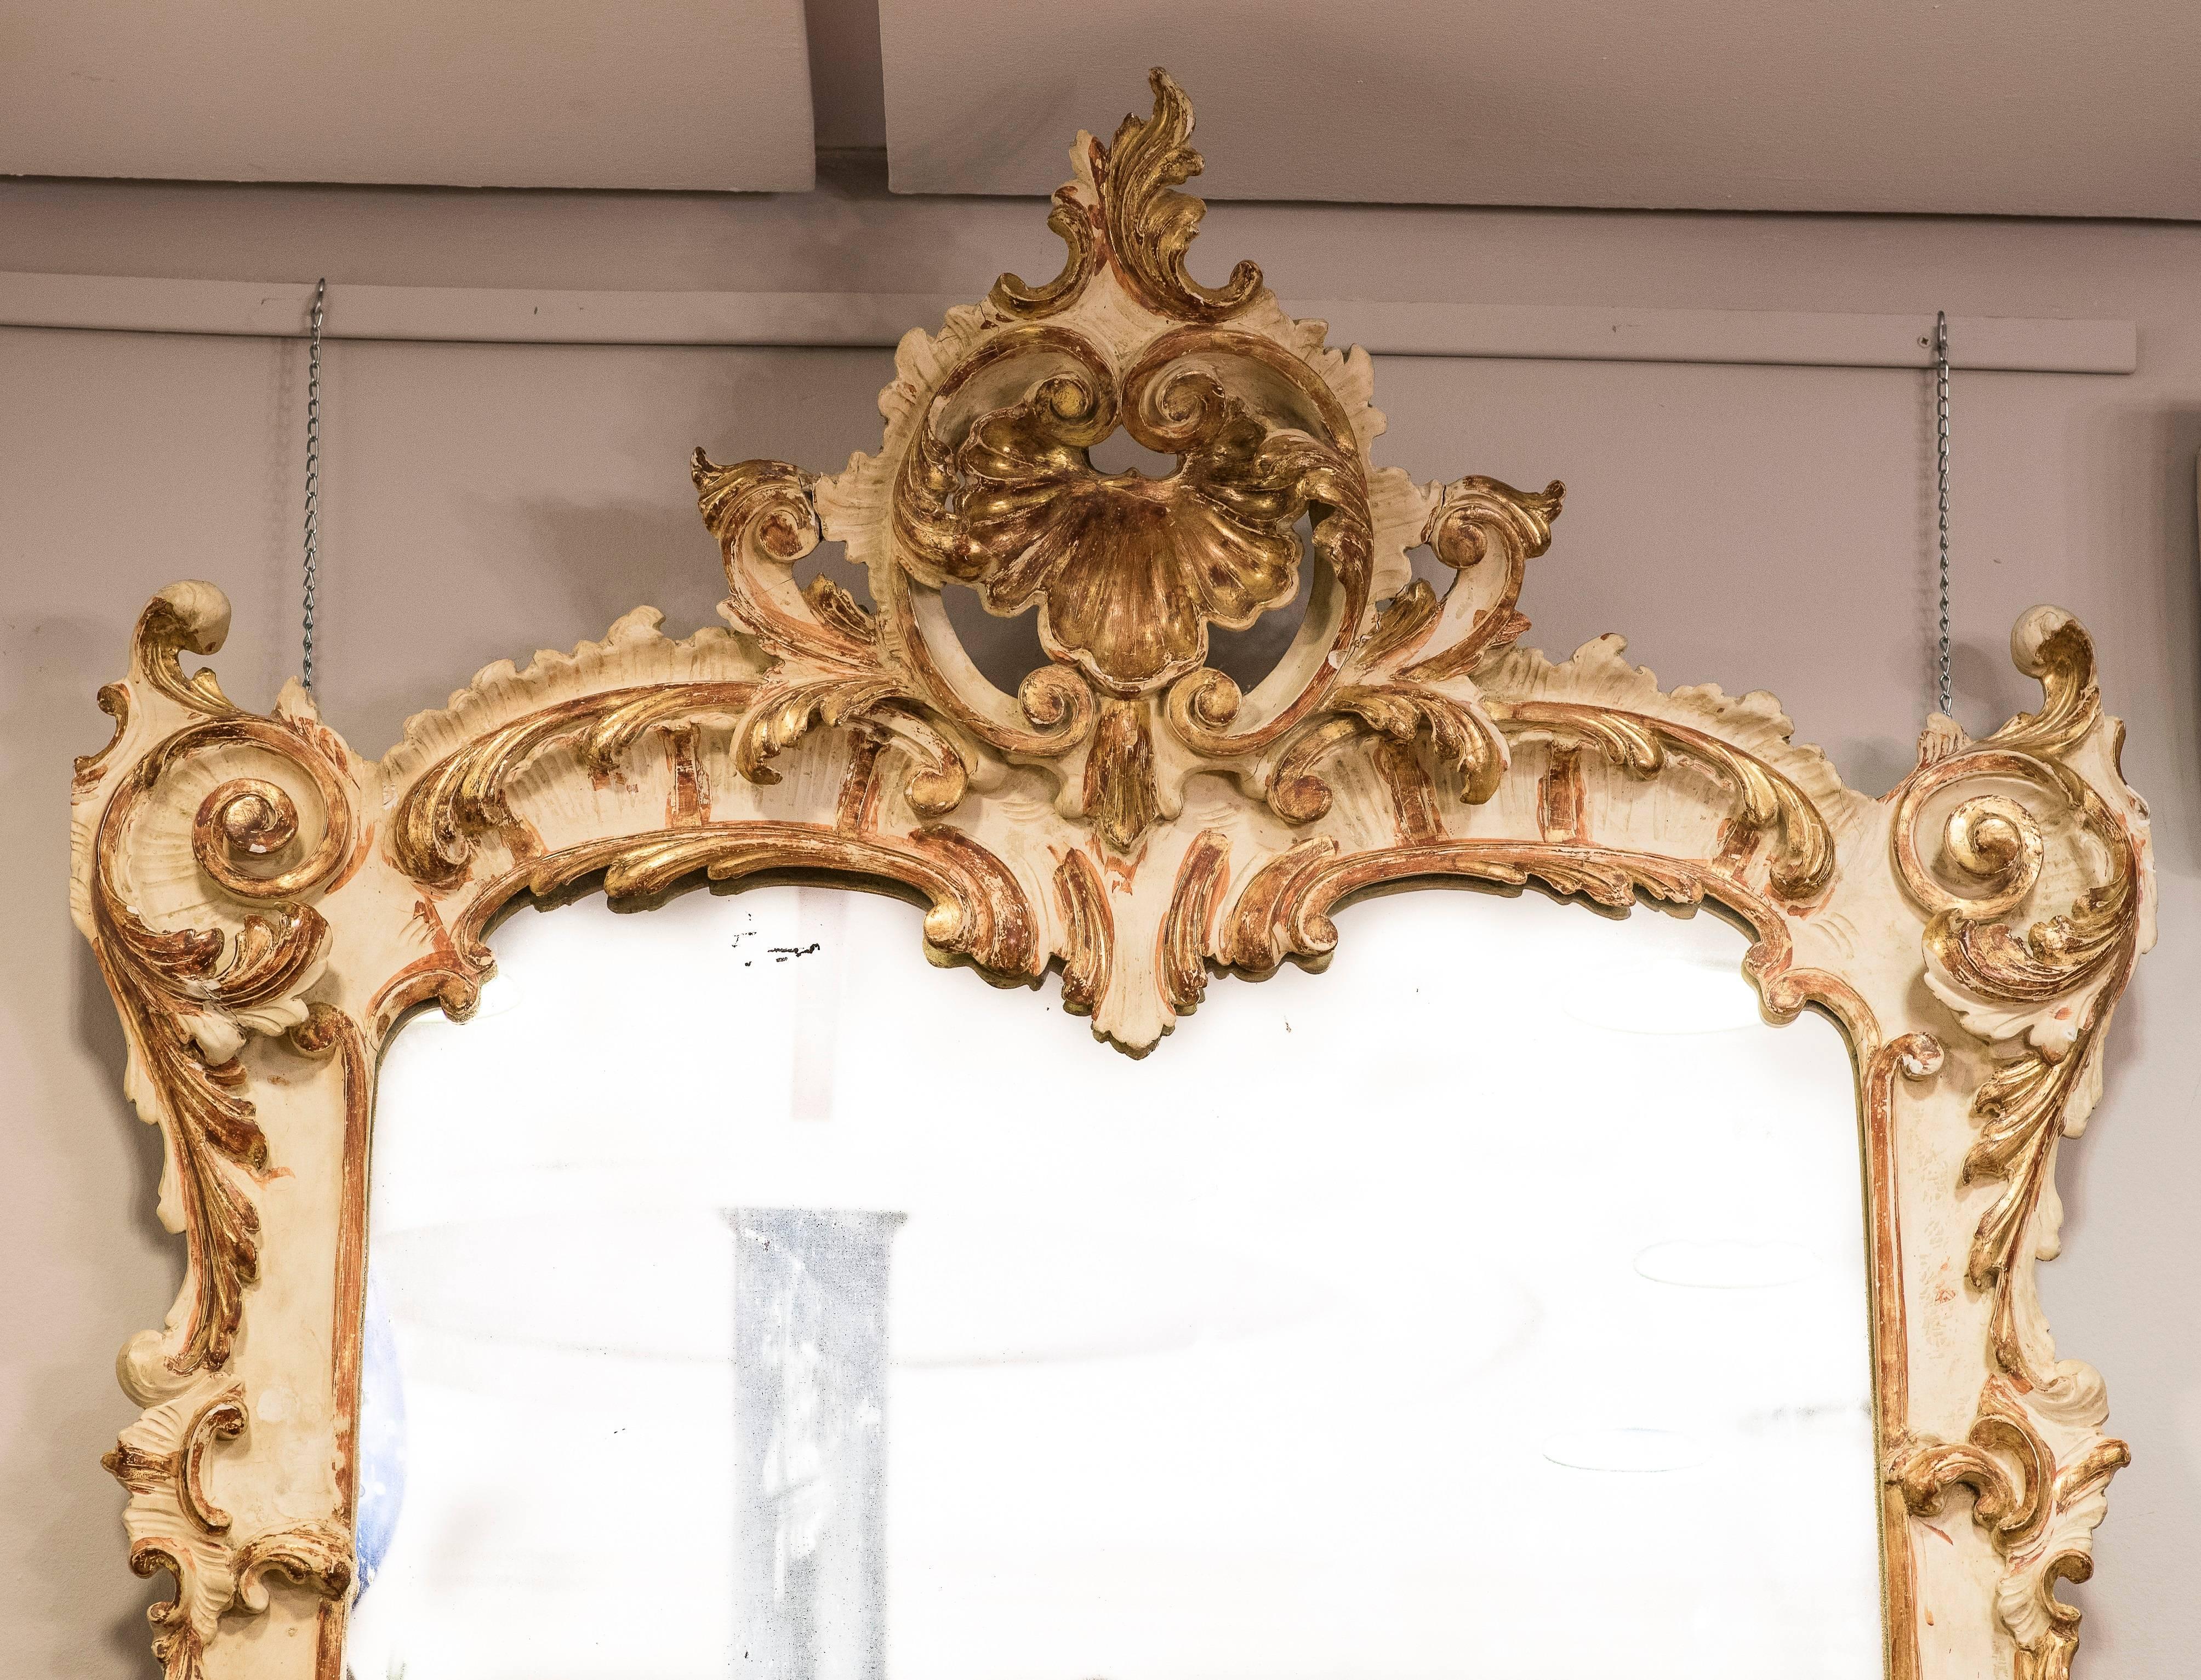 Rare and huge pair of Venetian mirrors in painted and golden carved wood.
From a very important private Italian collection in a Palace.